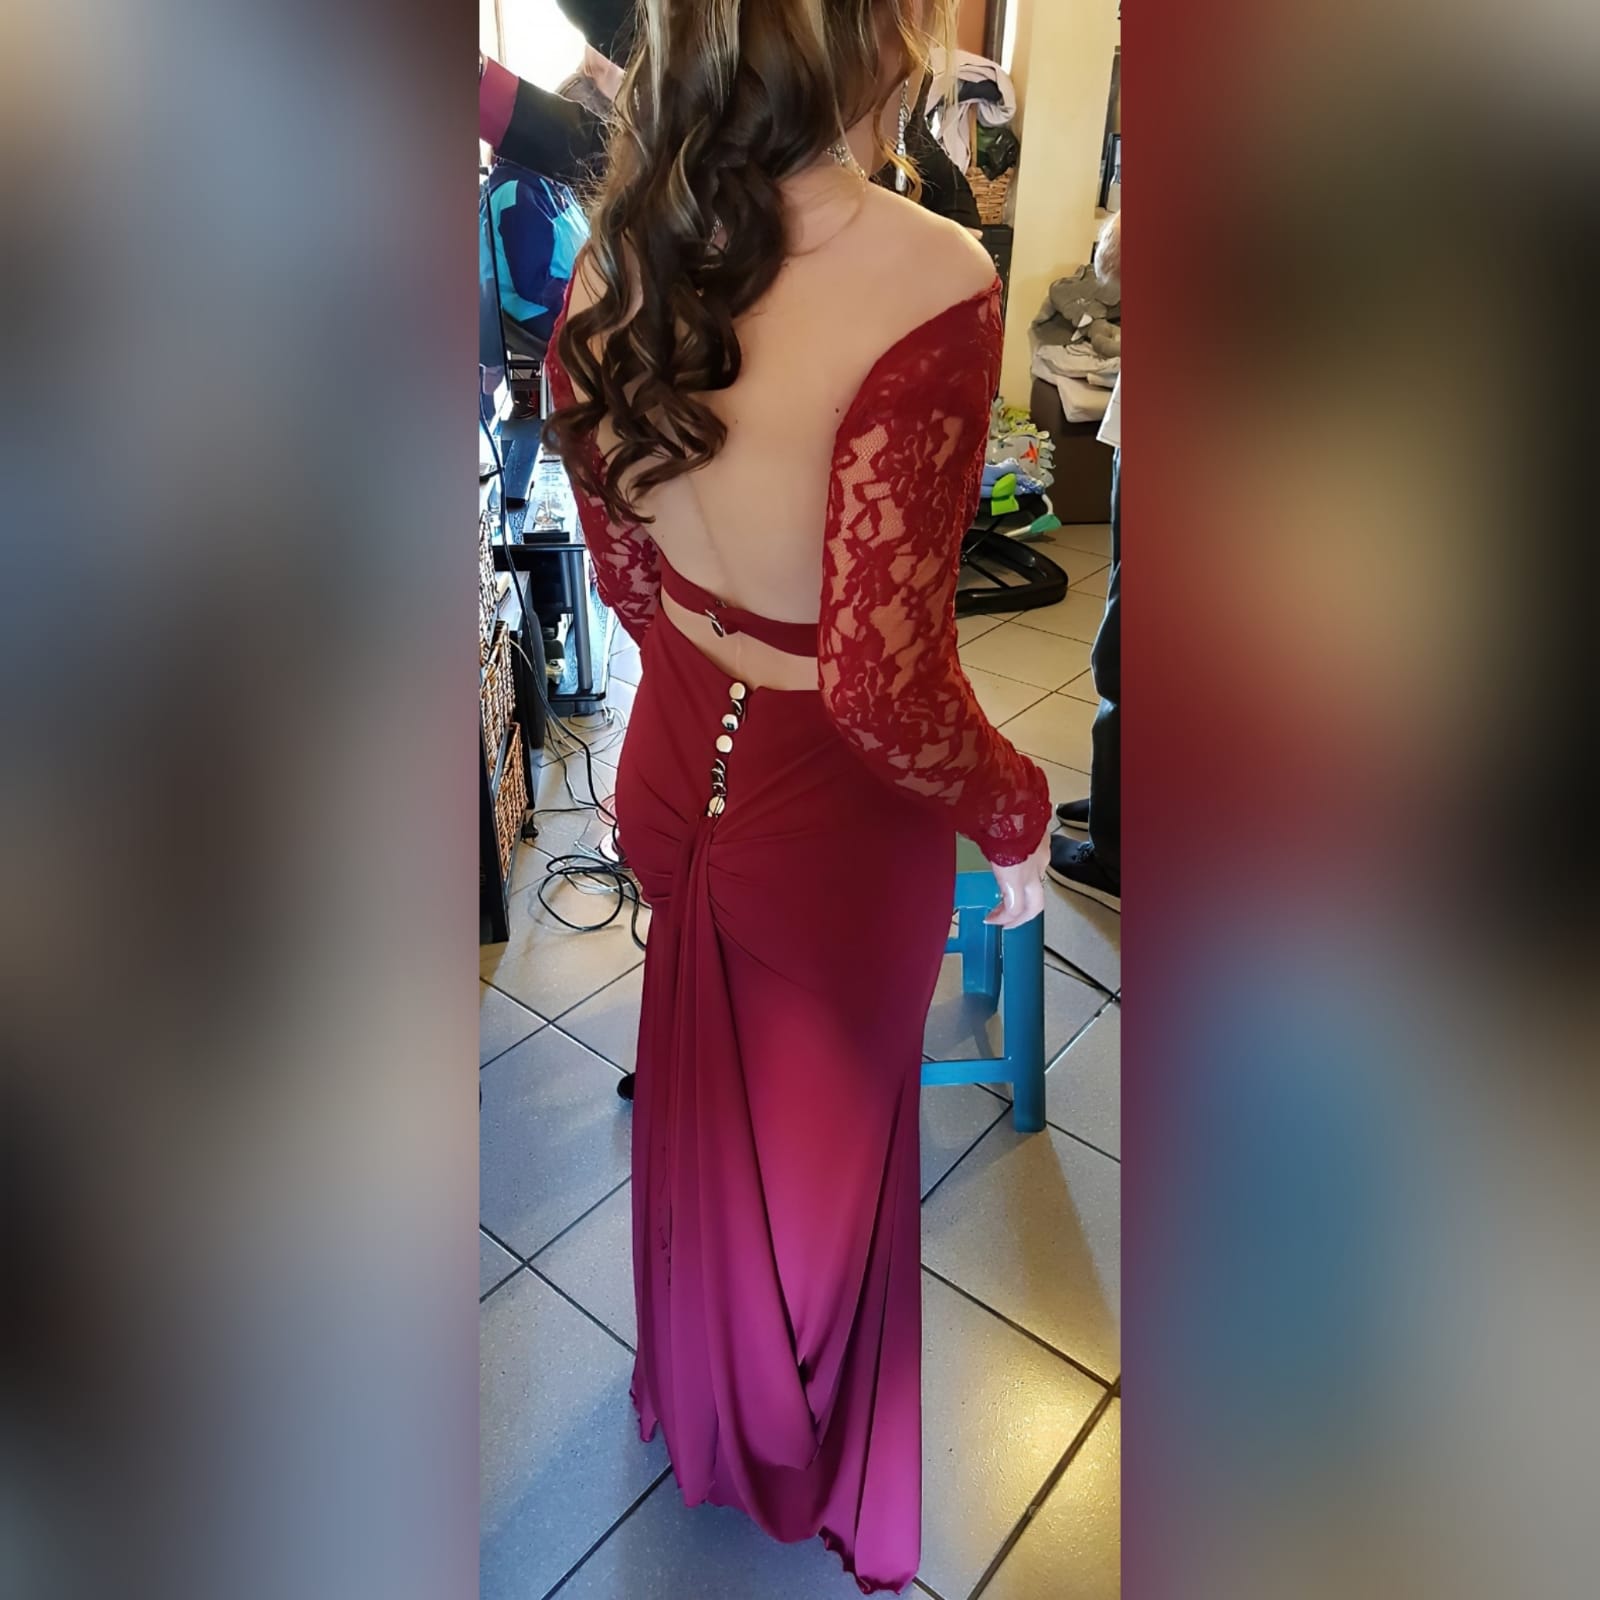 Deep red long sheer lace bodice prom dress 1 deep red long sheer lace bodice prom dress. Long off the shoulder lace sleeves with a rounded open back, slit and train.